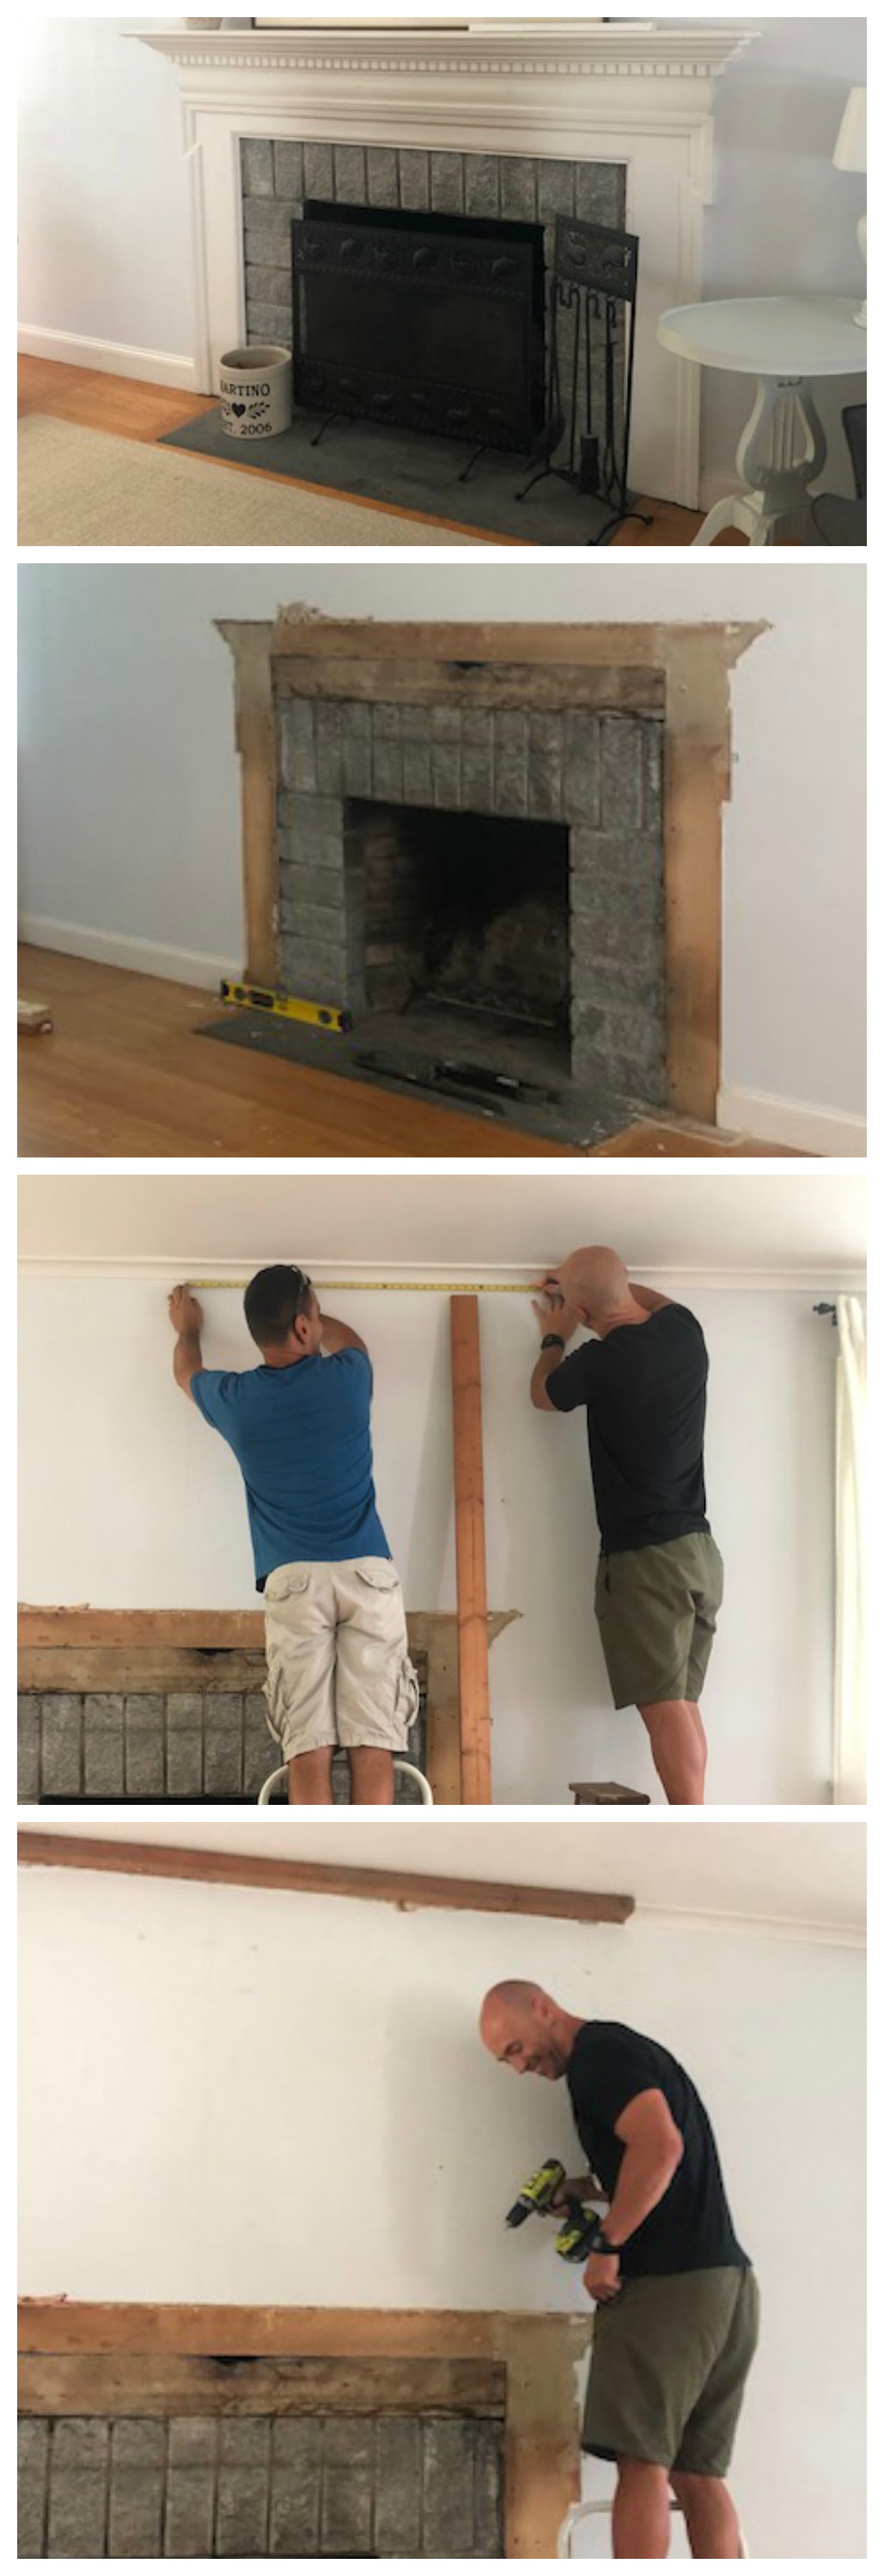 How to Install A Mantel On A Brick Fireplace Inspirational Shiplap Fireplace and Diy Mantle Ditched the Old